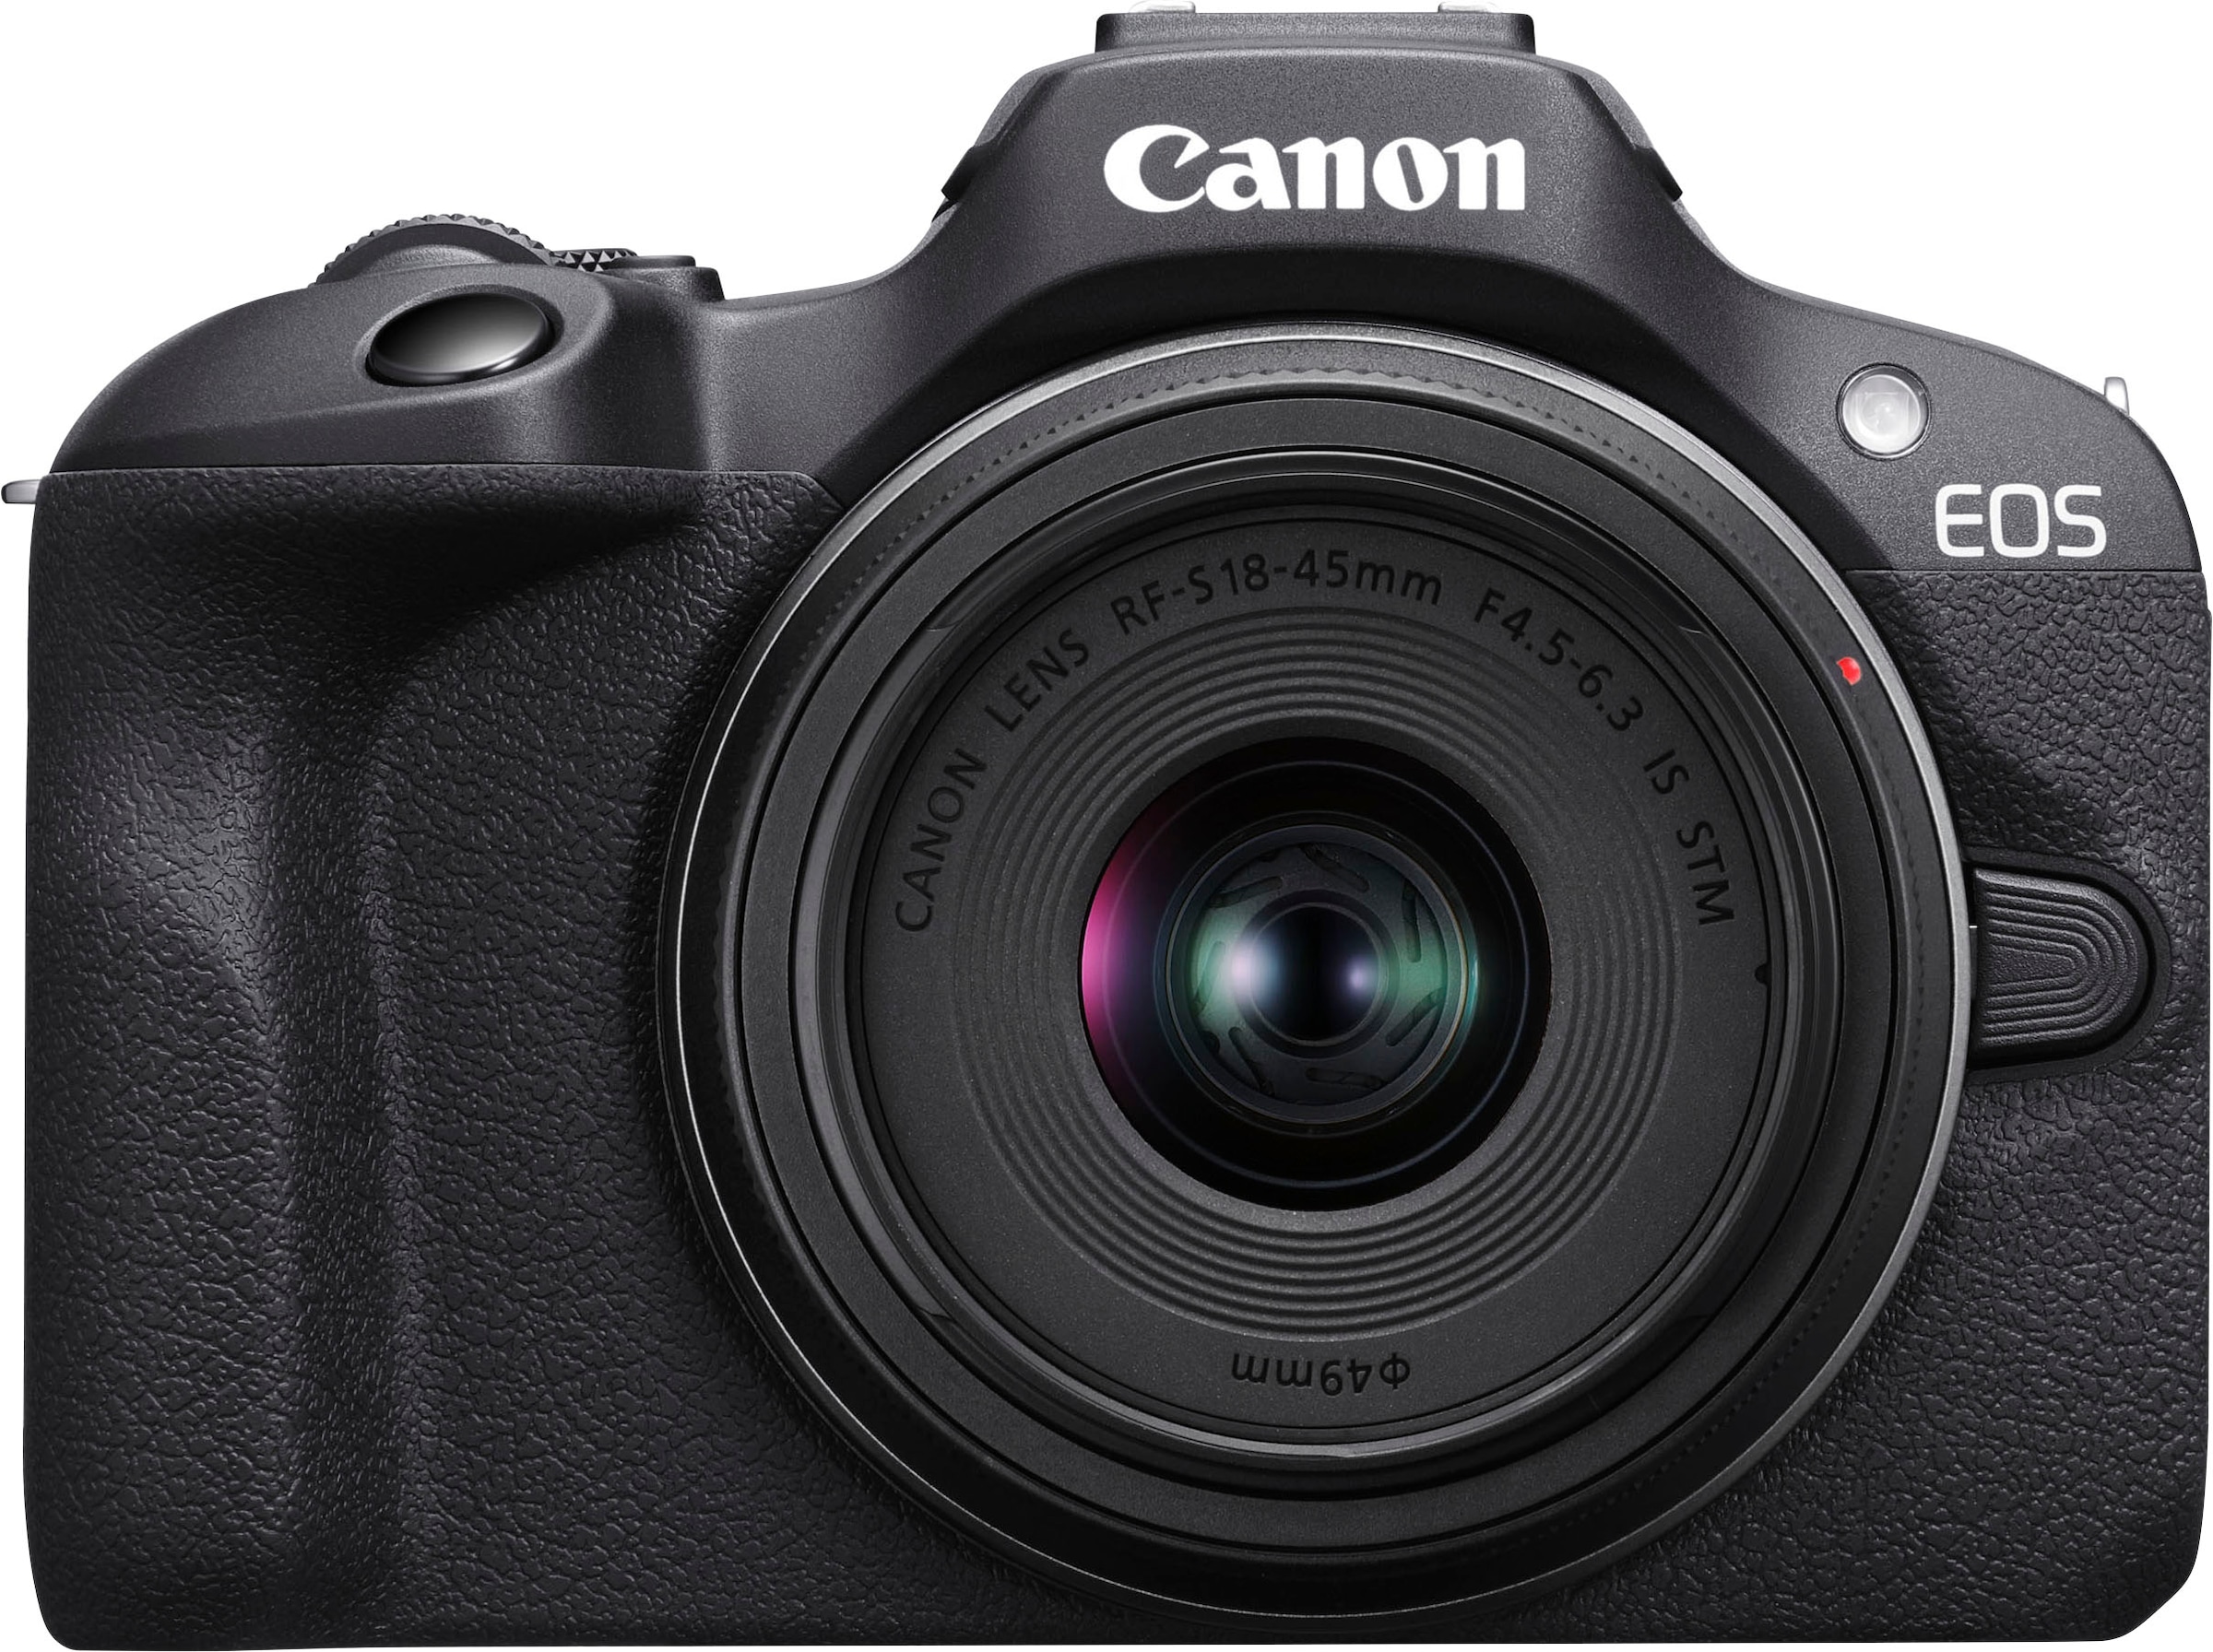 Canon Systemkamera F4.5-6.3 R100 IS RF-S 24,1 STM, bei Bluetooth-WLAN IS 18-45mm + STM »EOS MP, Kit«, 18-45mm F4.5-6.3 RF-S